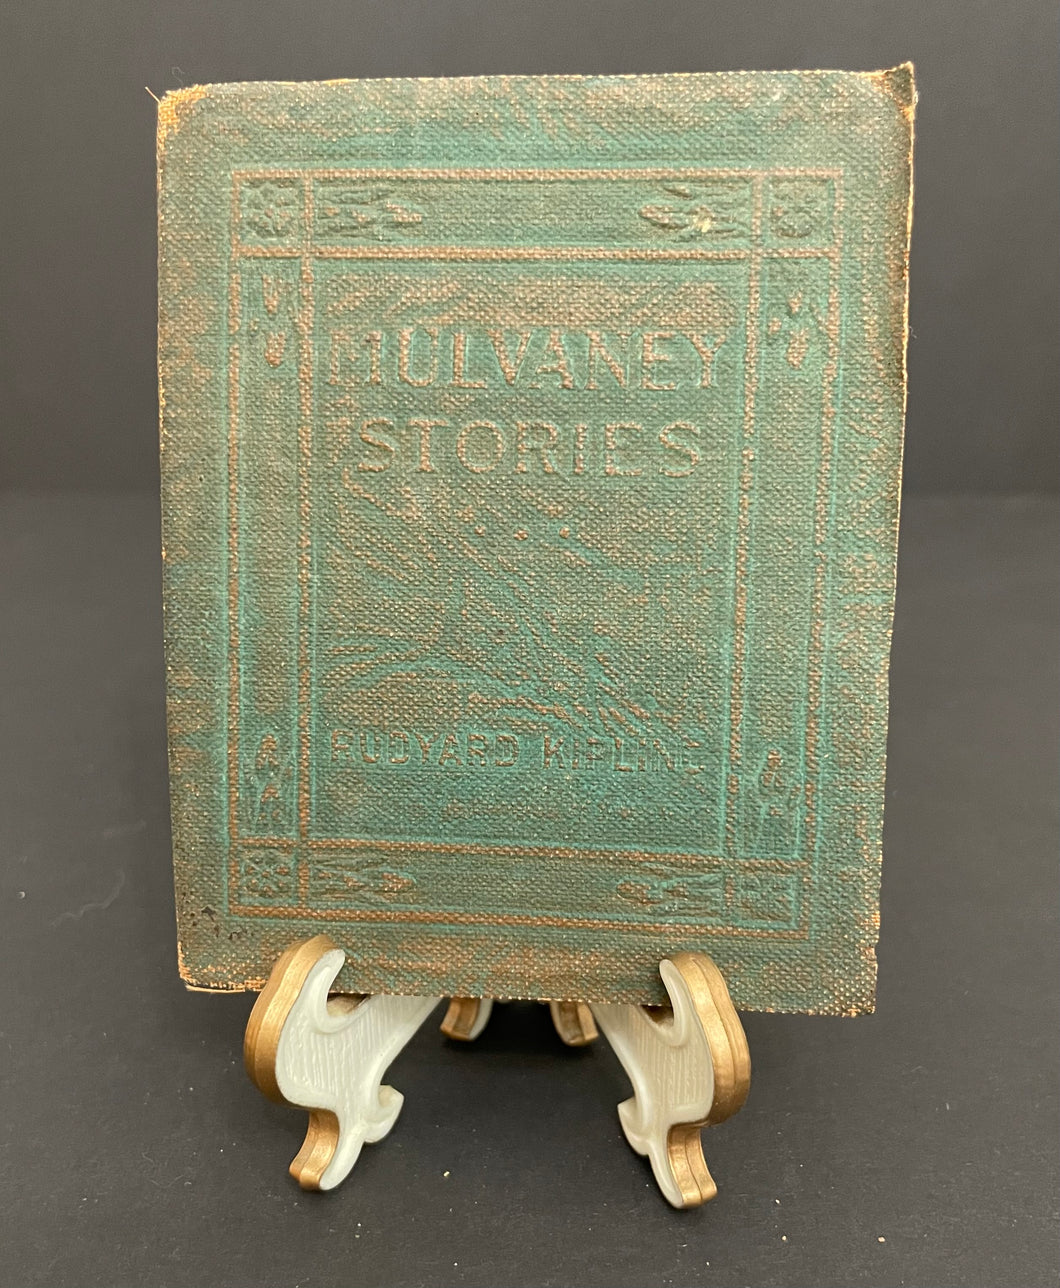 Antique Little Leather Library “Mulvaney Stories” by Kipling